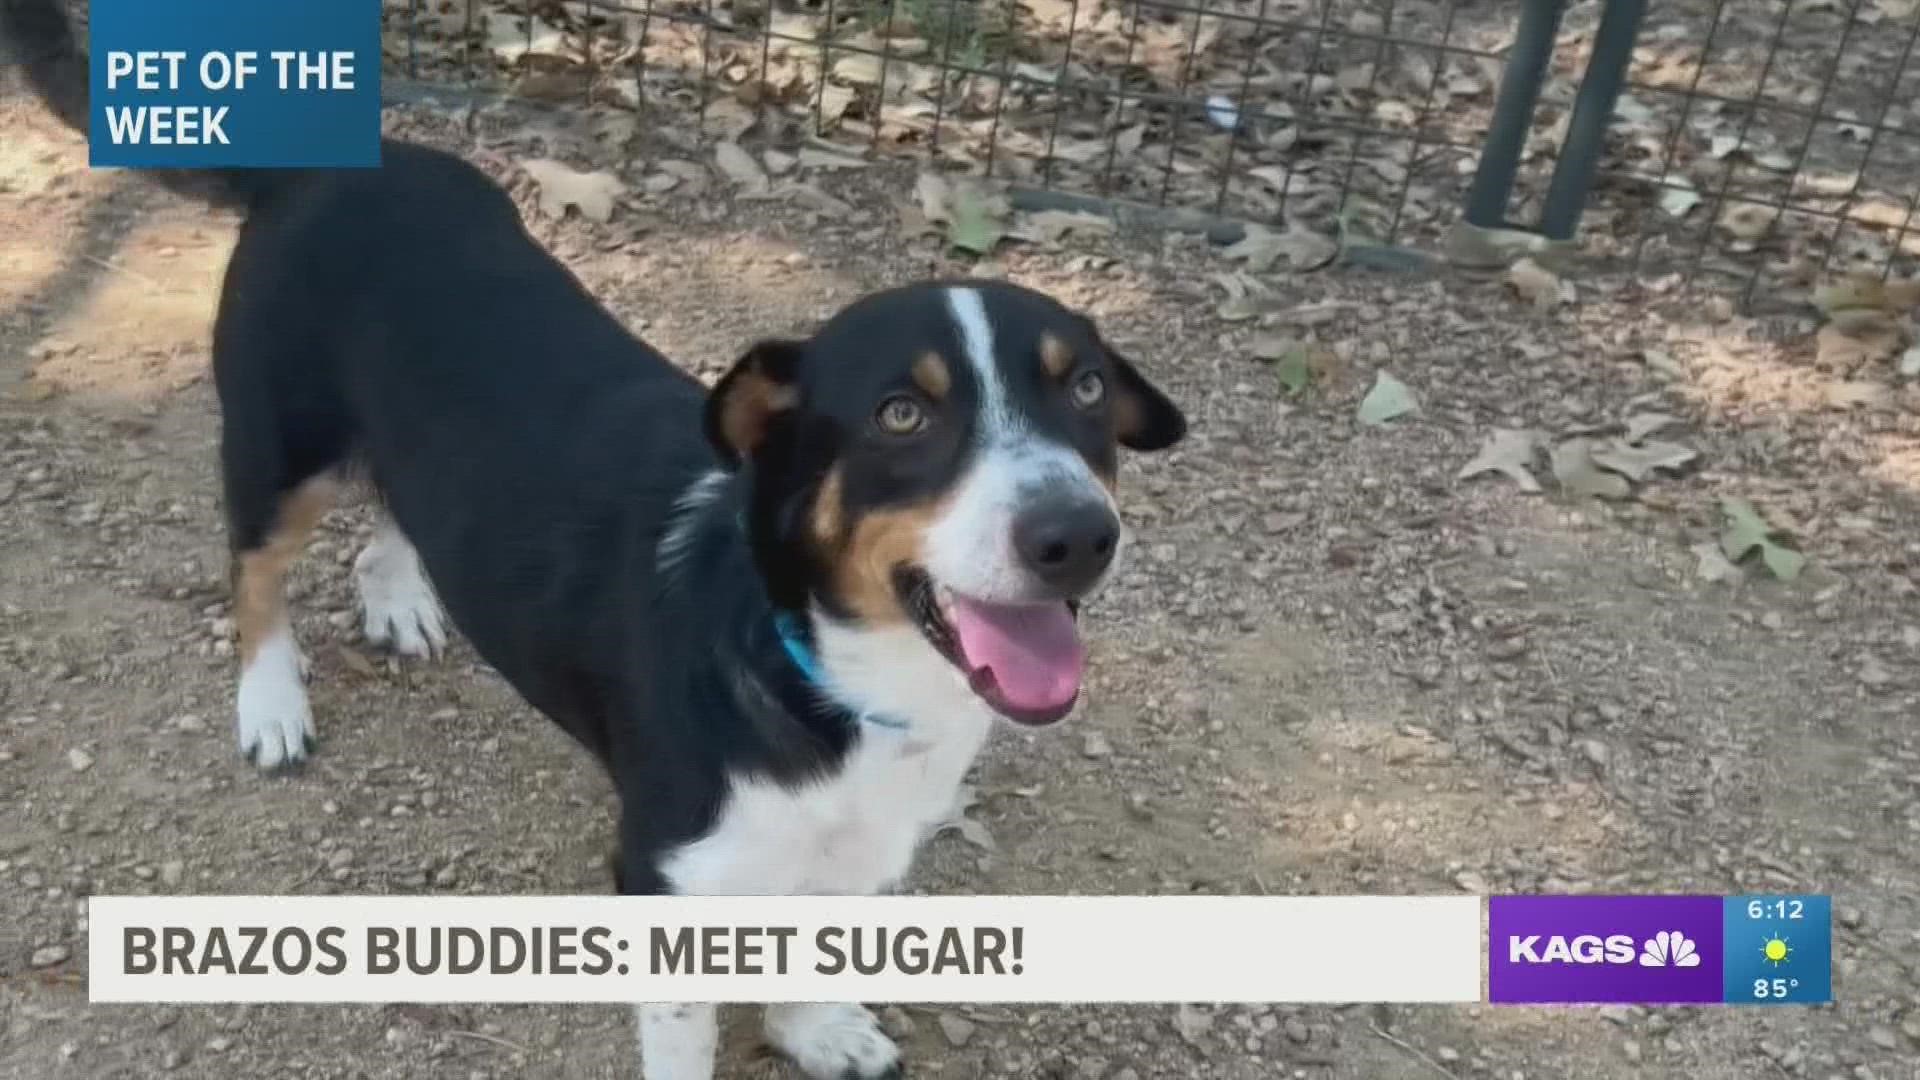 This week's featured Brazos Buddy is Sugar, a one-year-old terrier mix that's looking for his forever home.